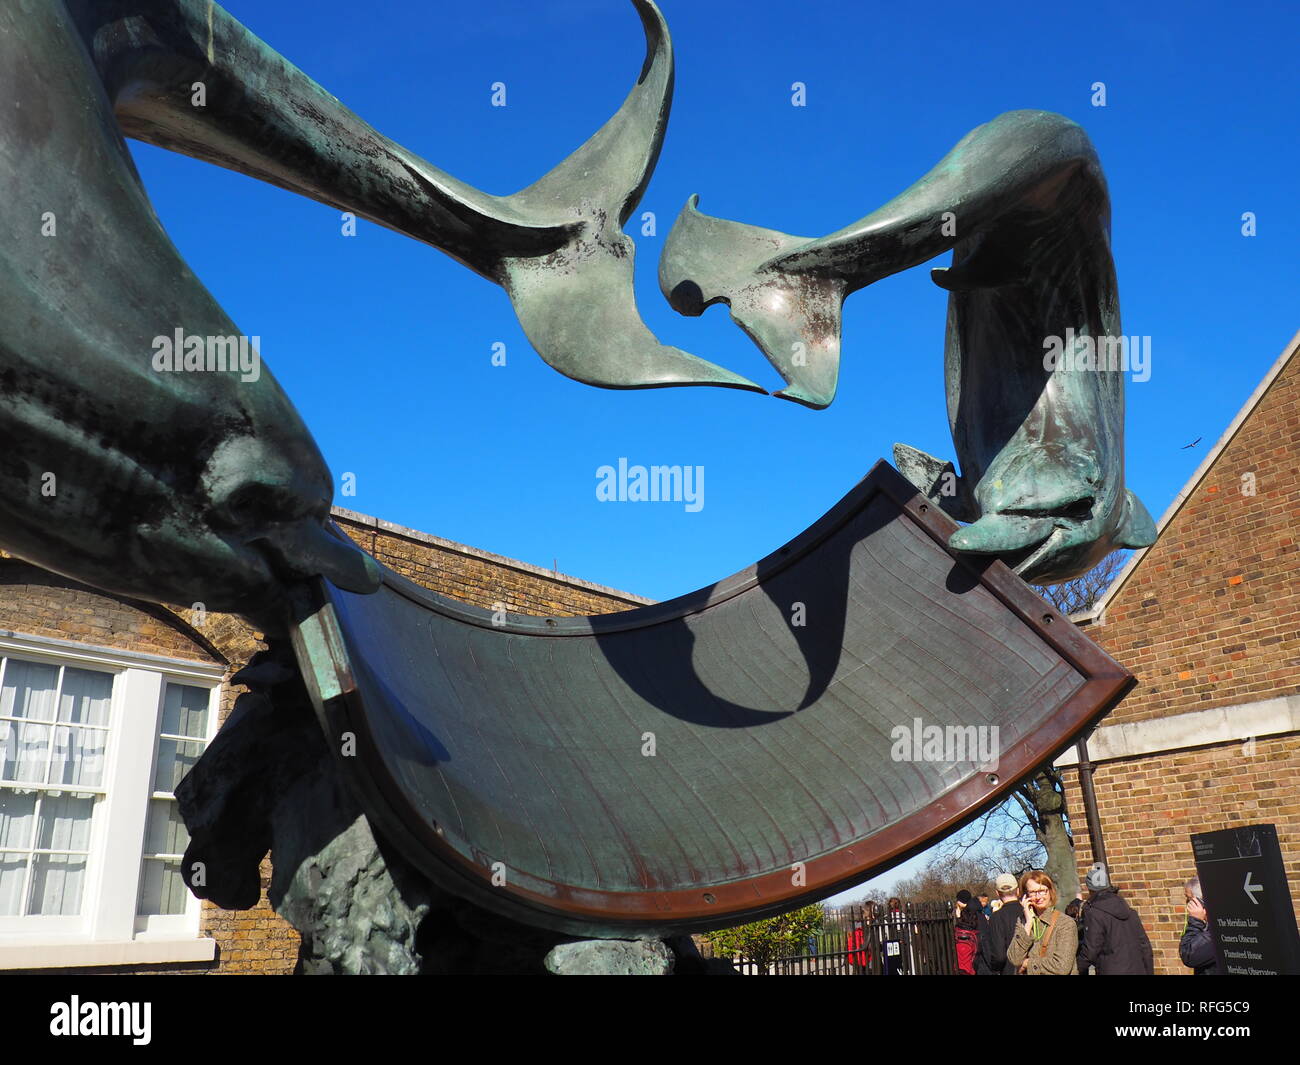 Dolphin equinoctial dial at the Royal Observatory in Greenwich - London - UK Stock Photo